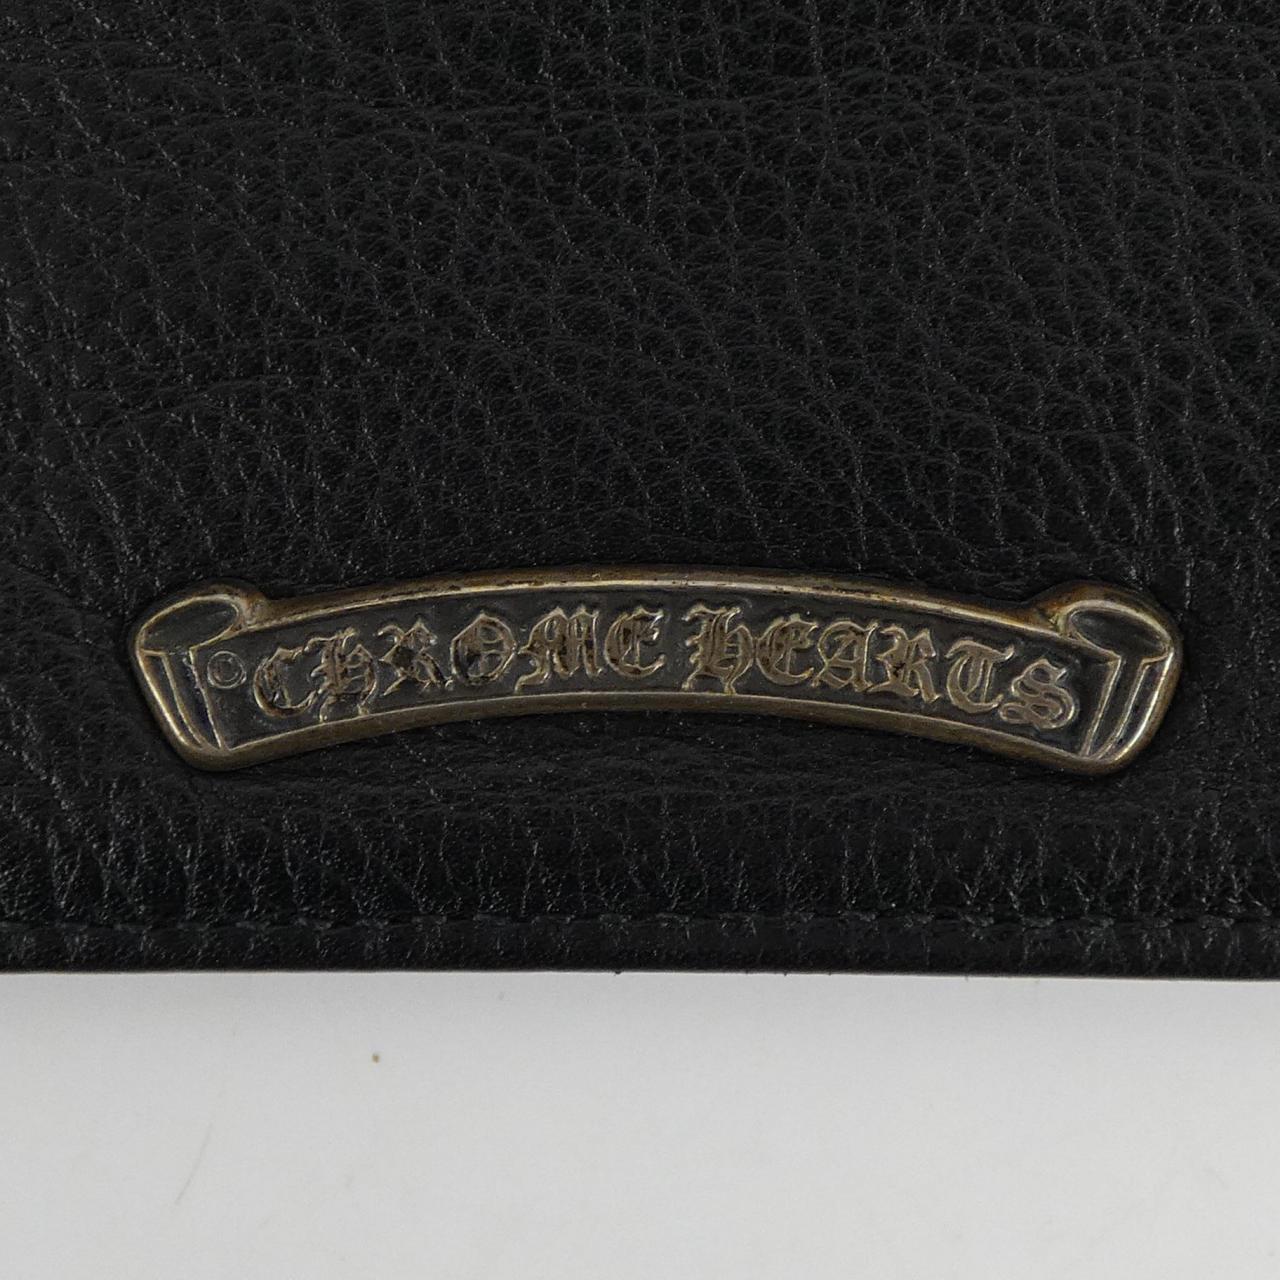 CHROME HEARTS HEARTS POUCH